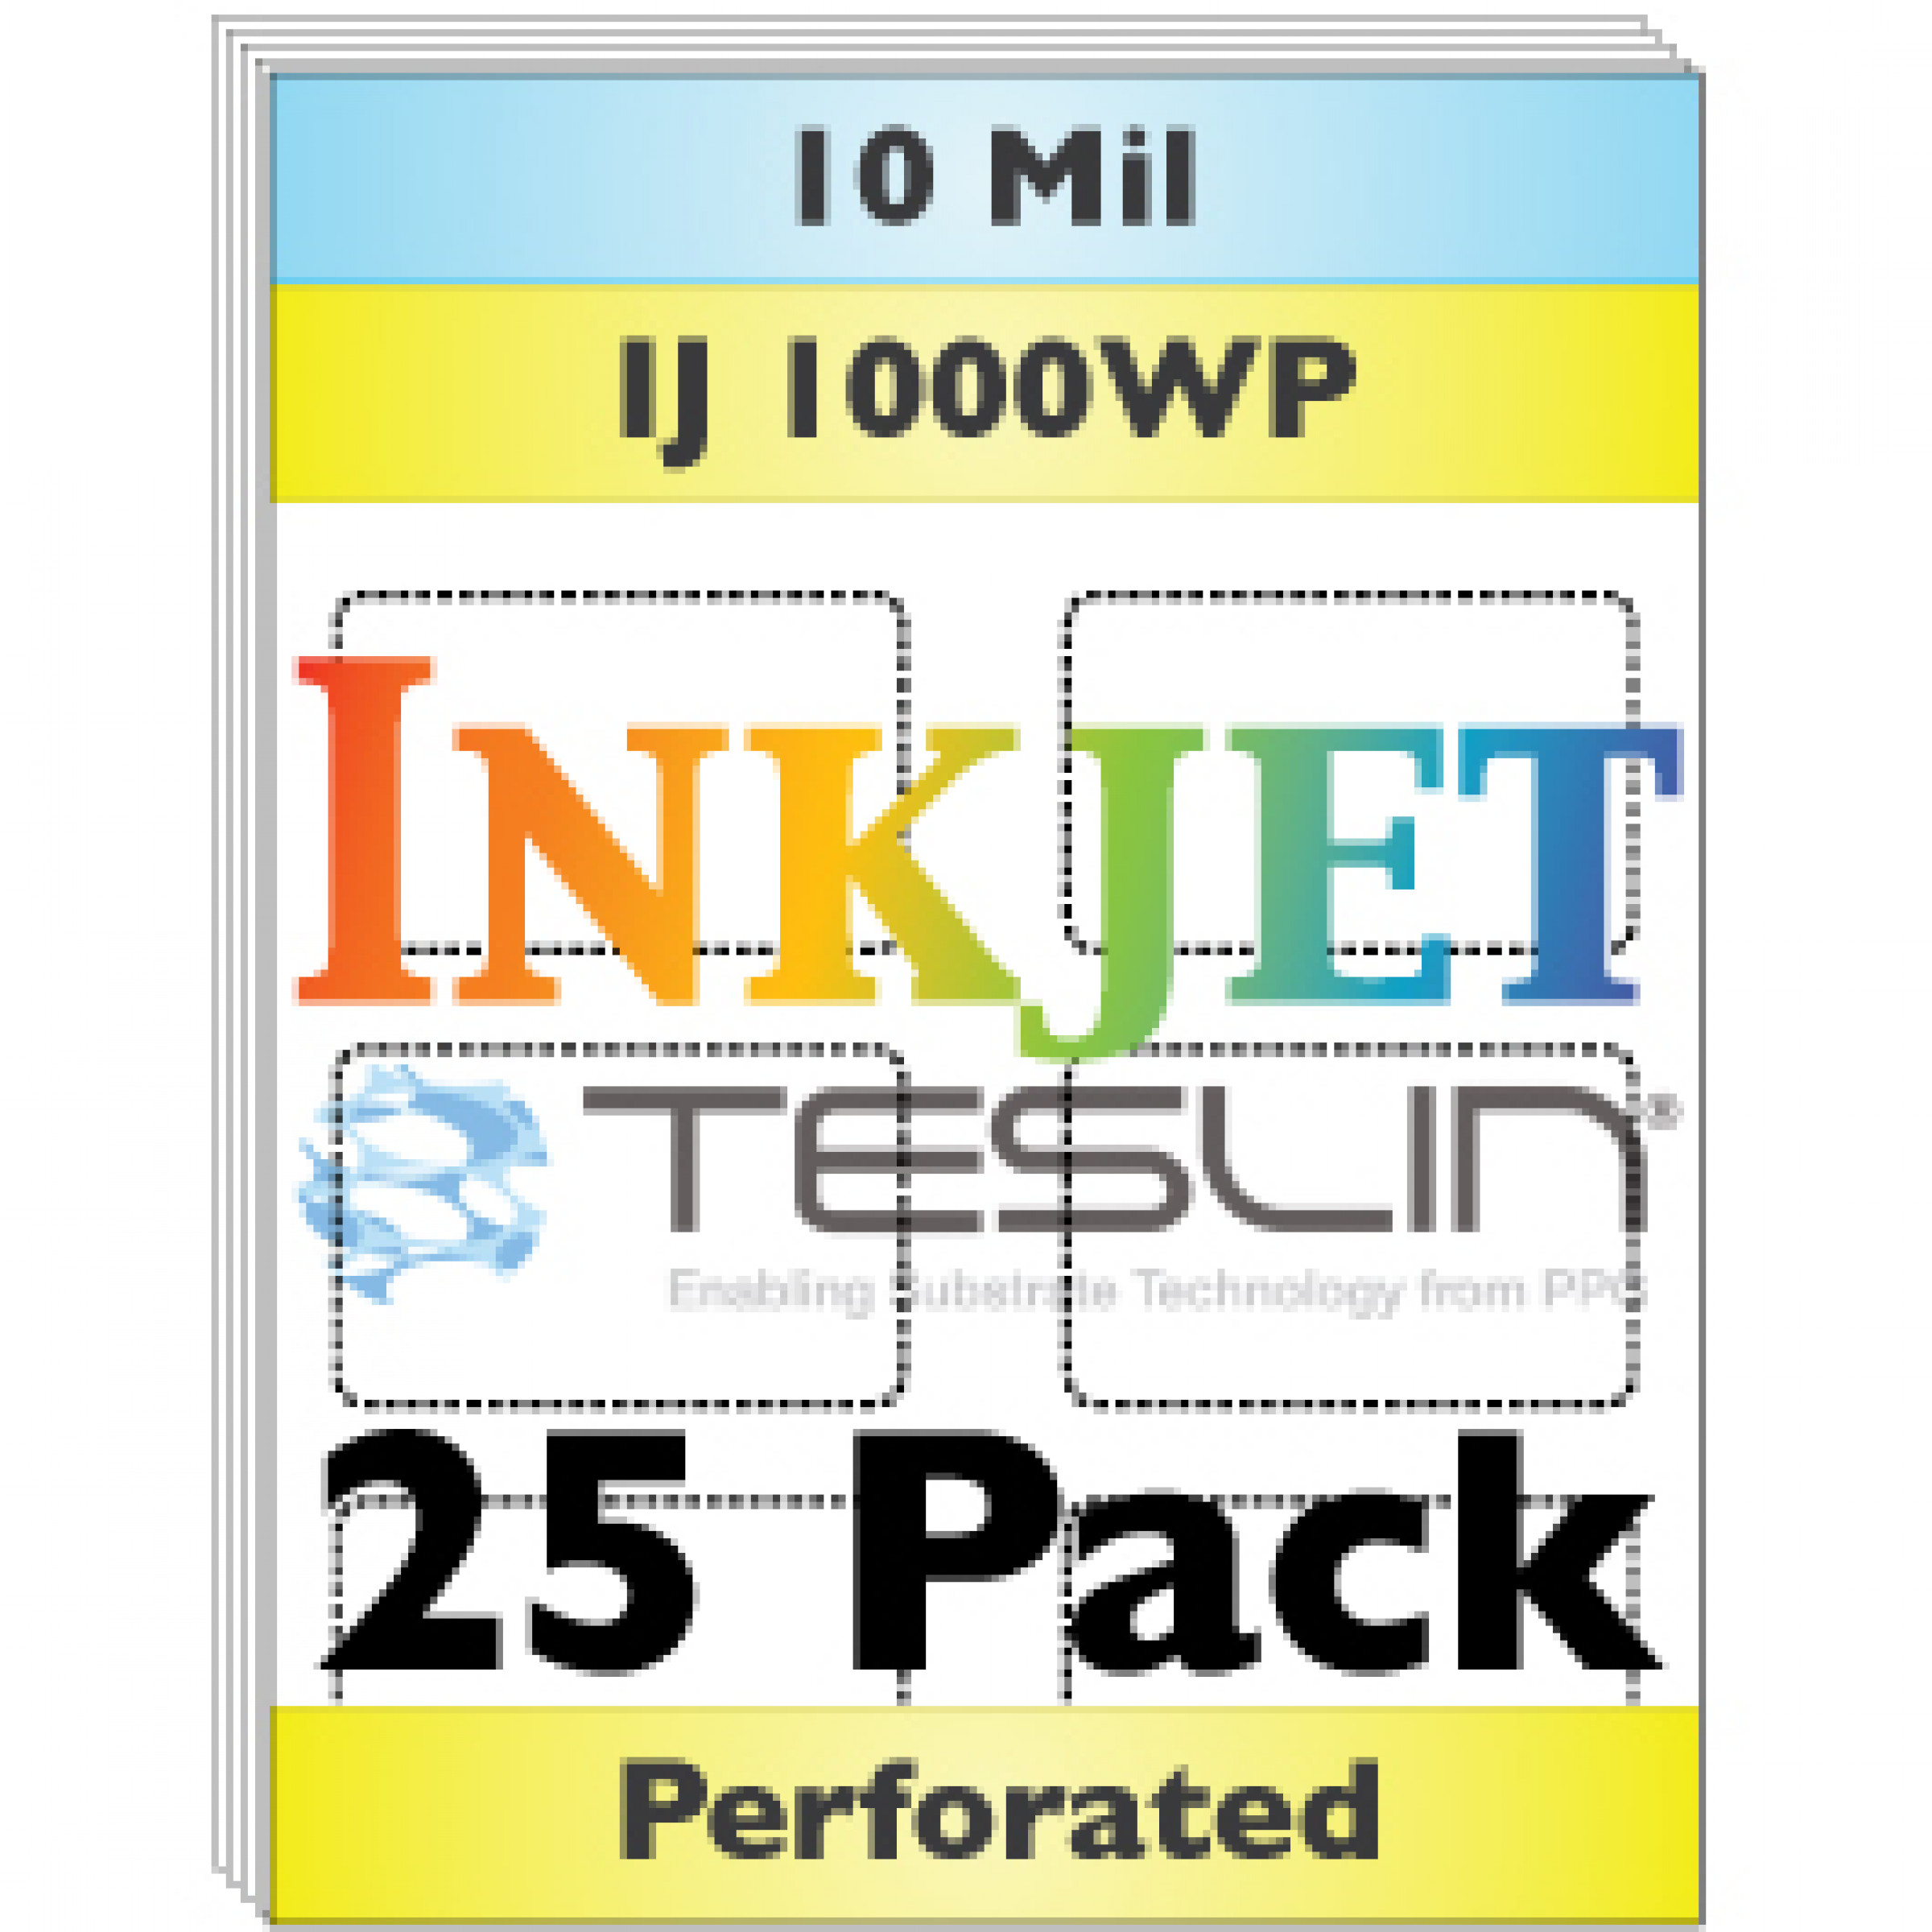 Butterfly Pouches 10 ID Card Kit and Holograms Laminator Make PVC Like ID Cards Inkjet Teslin 